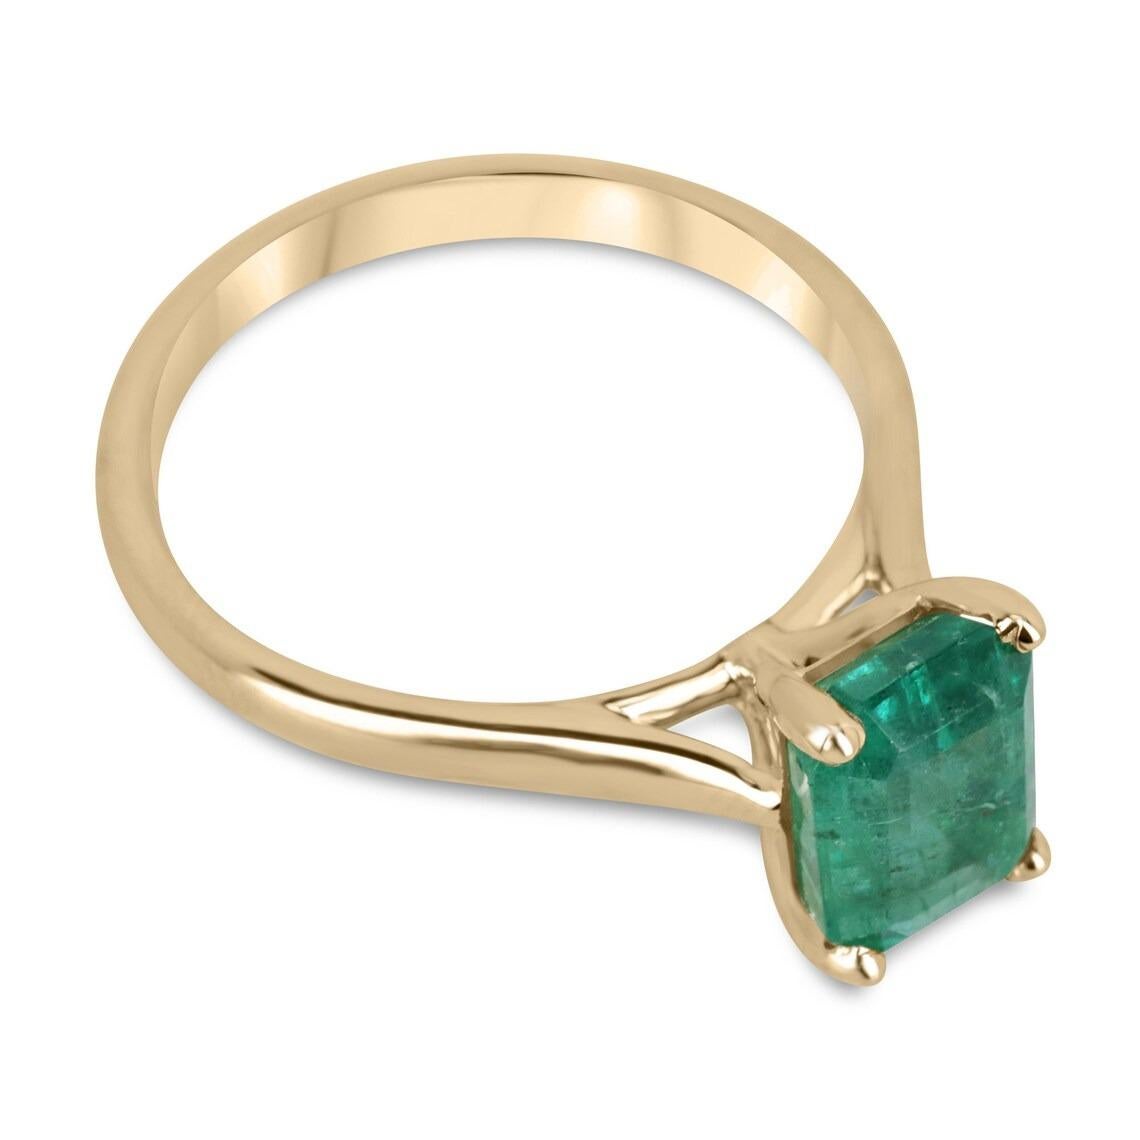 Displayed is a classic emerald solitaire emerald-cut engagement ring/right-hand ring in 14K yellow gold. This gorgeous solitaire ring carries a full 2.25-carat emerald in a four-prong setting. Fully faceted, this gemstone showcases excellent shine.